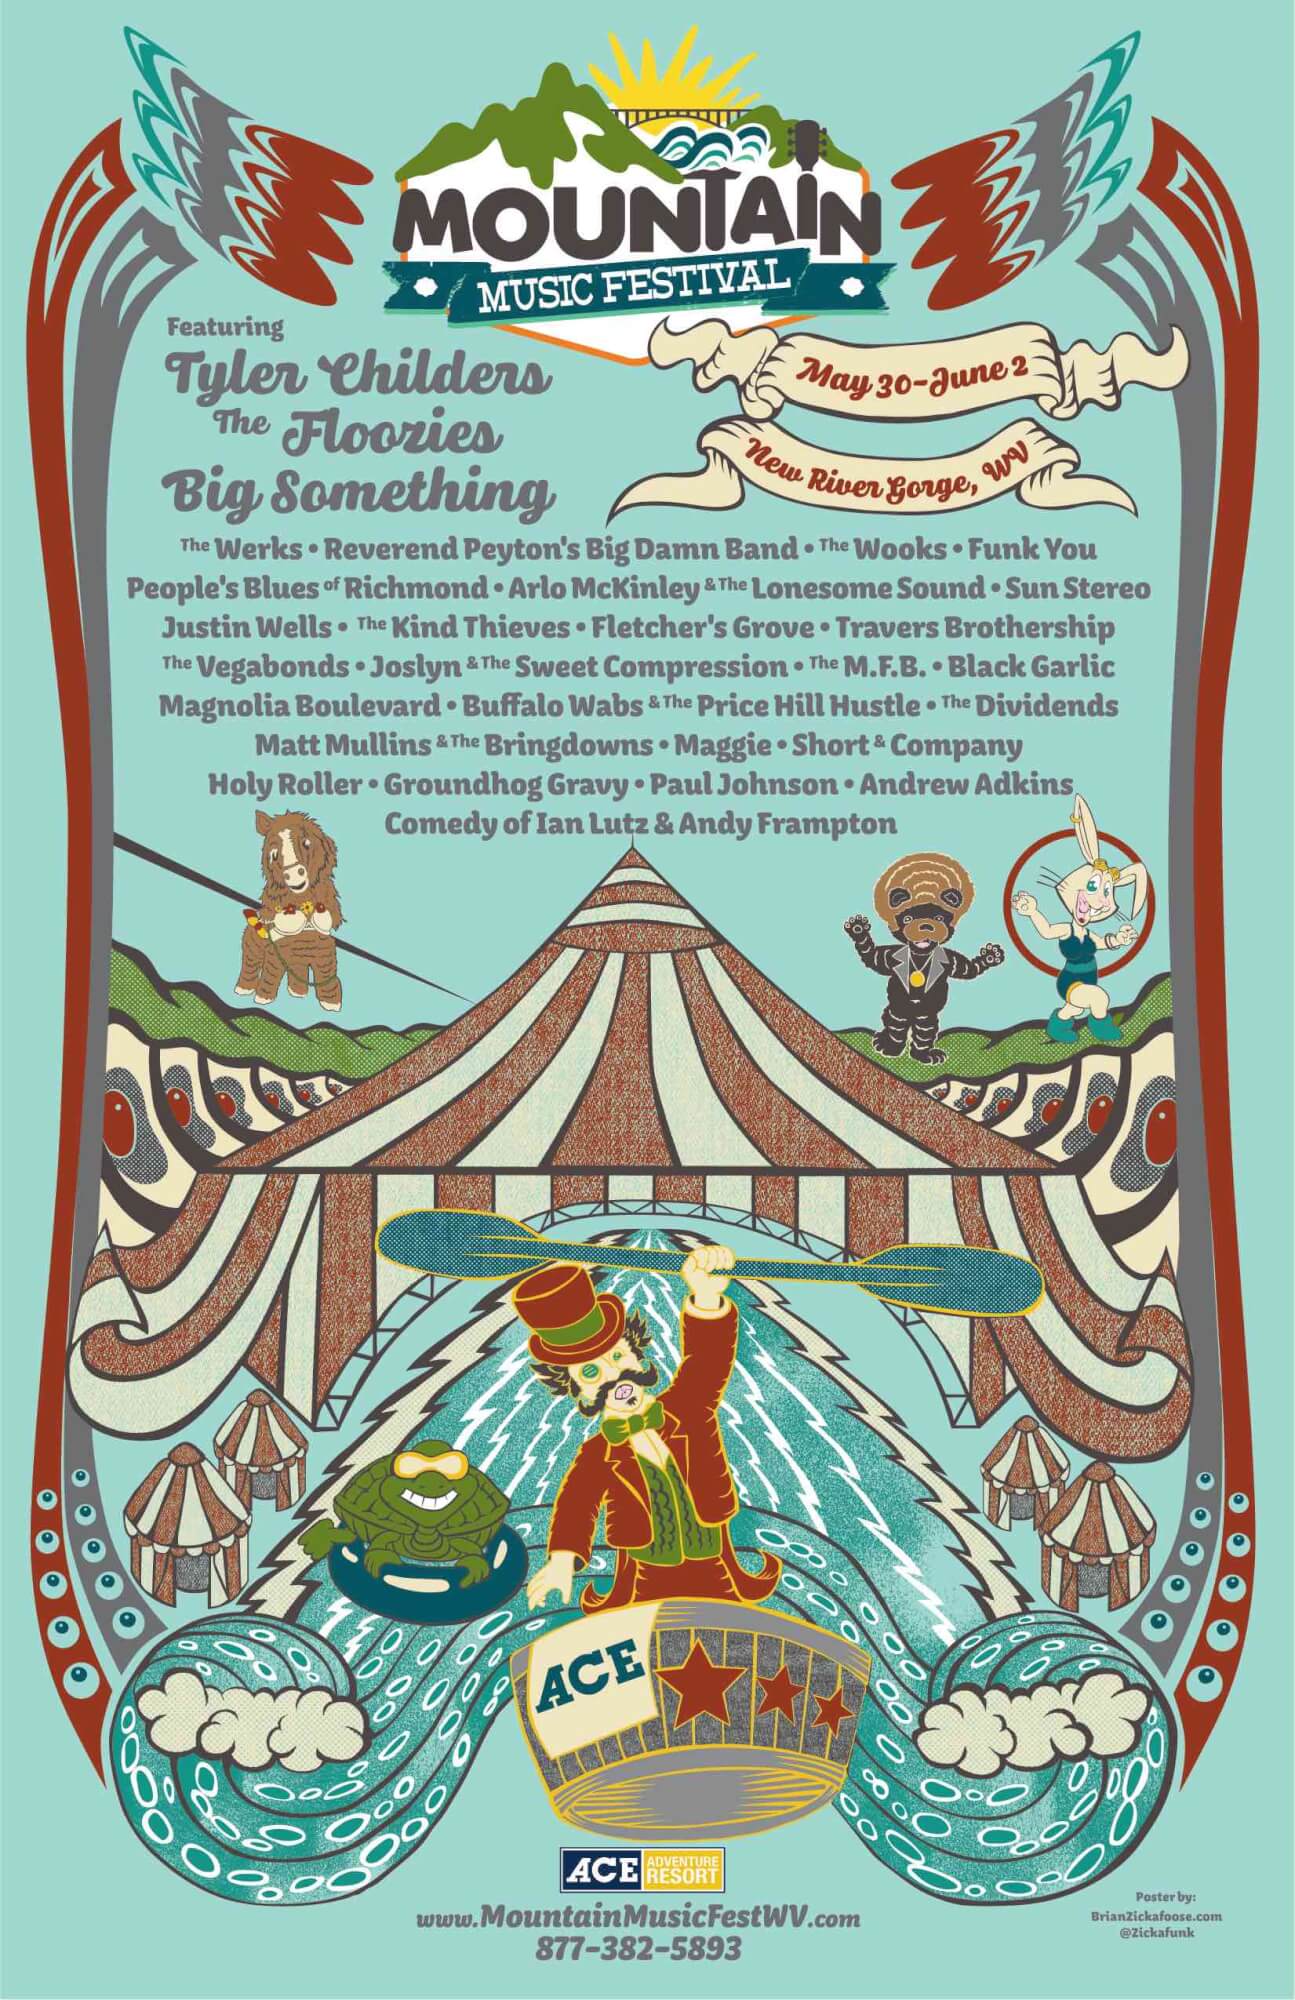 mountain music festival 2019 show poster with lineup featuring tyler childers the floozies, big something the werks reverend peytons big damn band the wooks and more